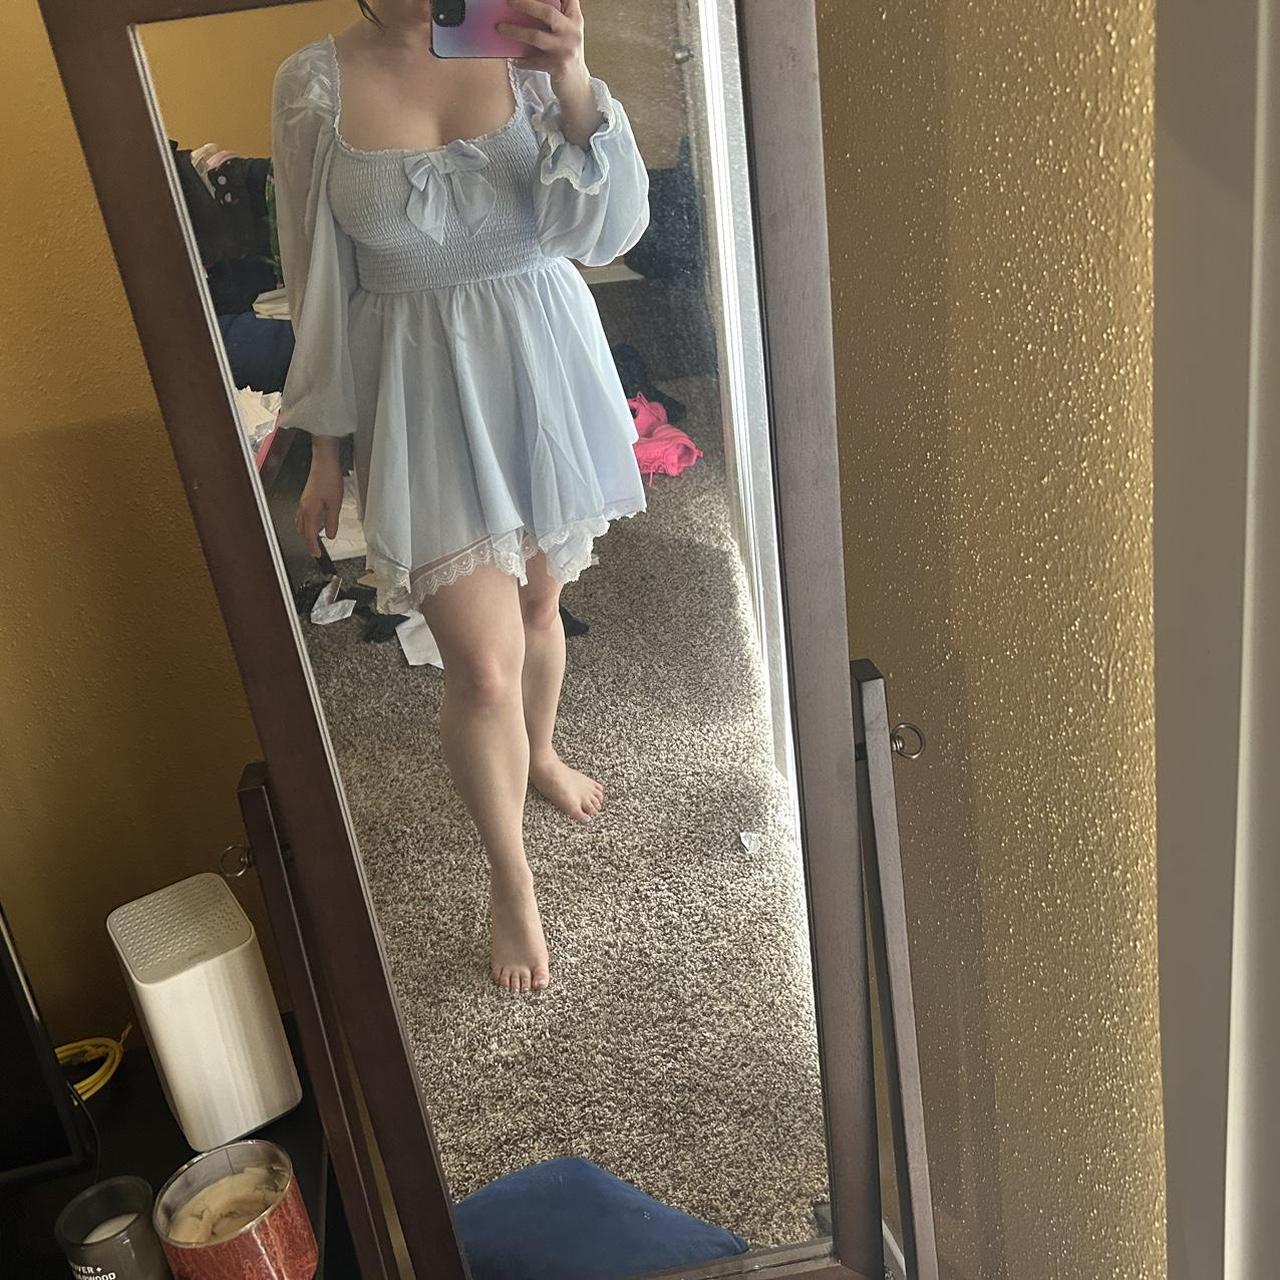 FOR SALE: Amazing 1960s Nightgown! Gives me Alice in - Depop